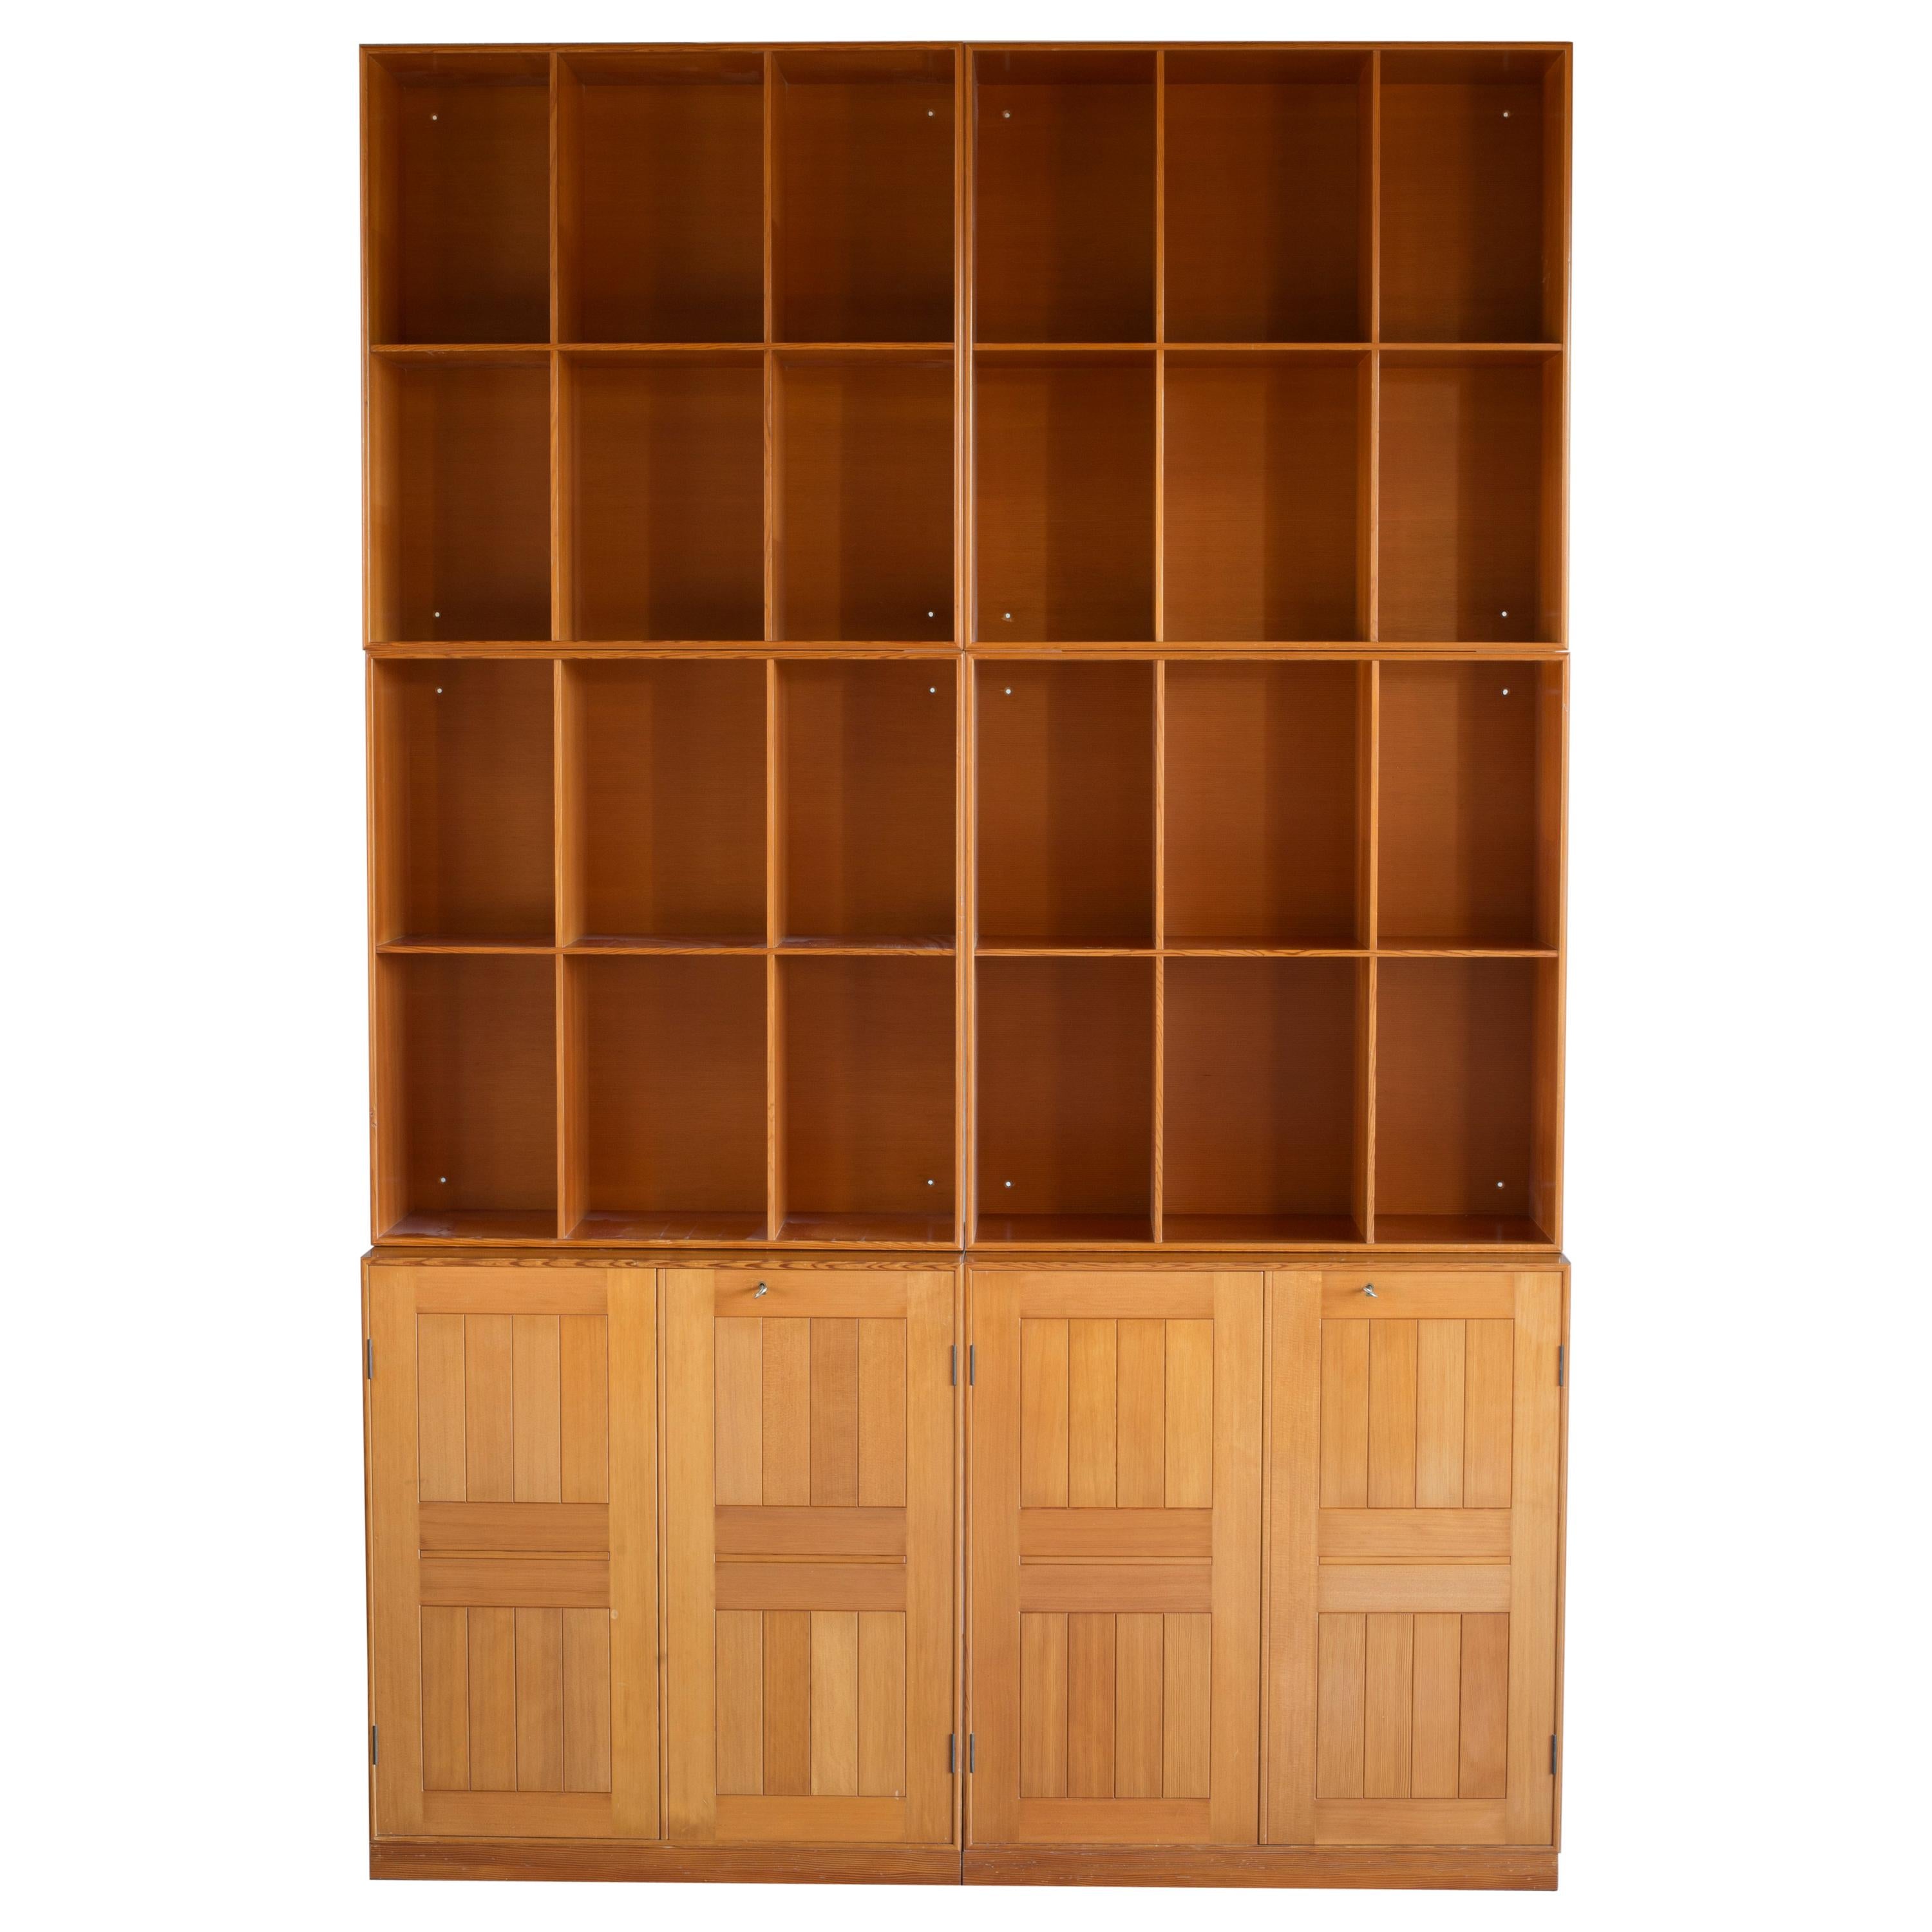 Mogens Koch Cabinets and Bookcases in Oregon Pine for Rud. Rasmussen